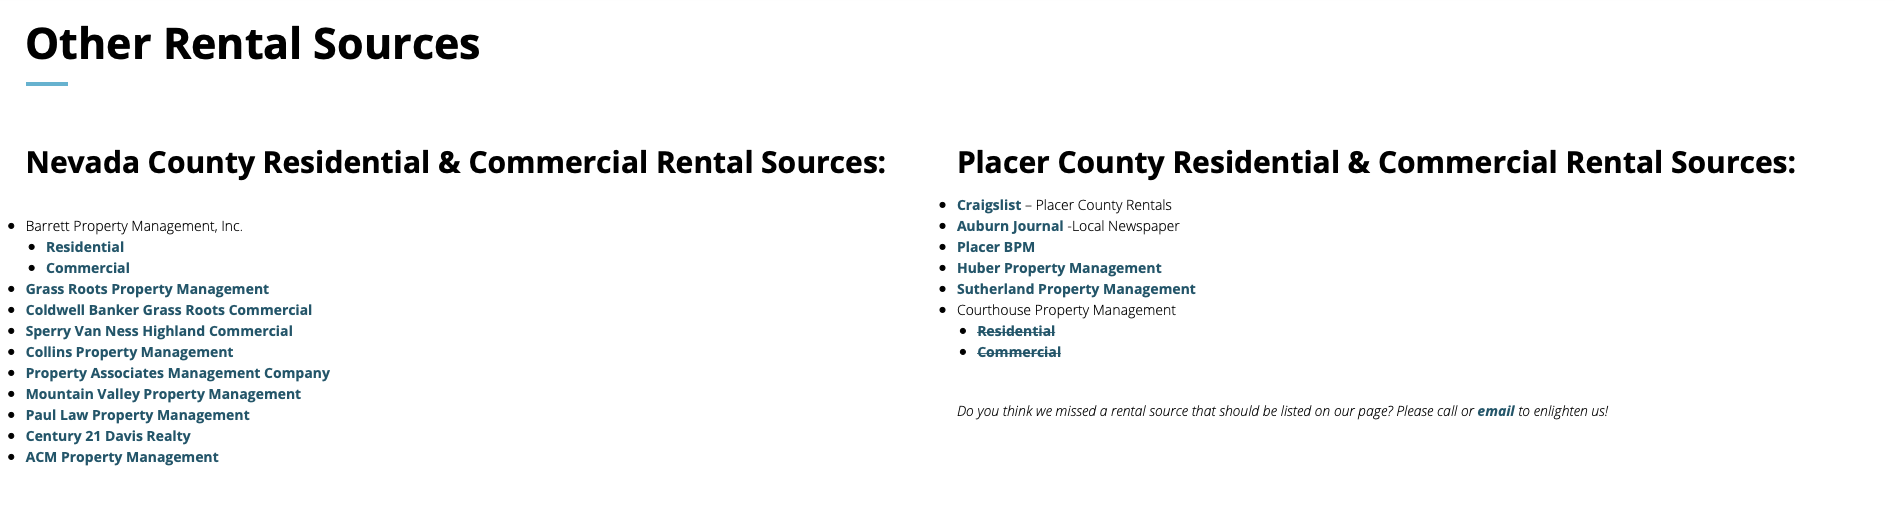 Screen Shot of Barrett Property Management's Other Rental Sources Page